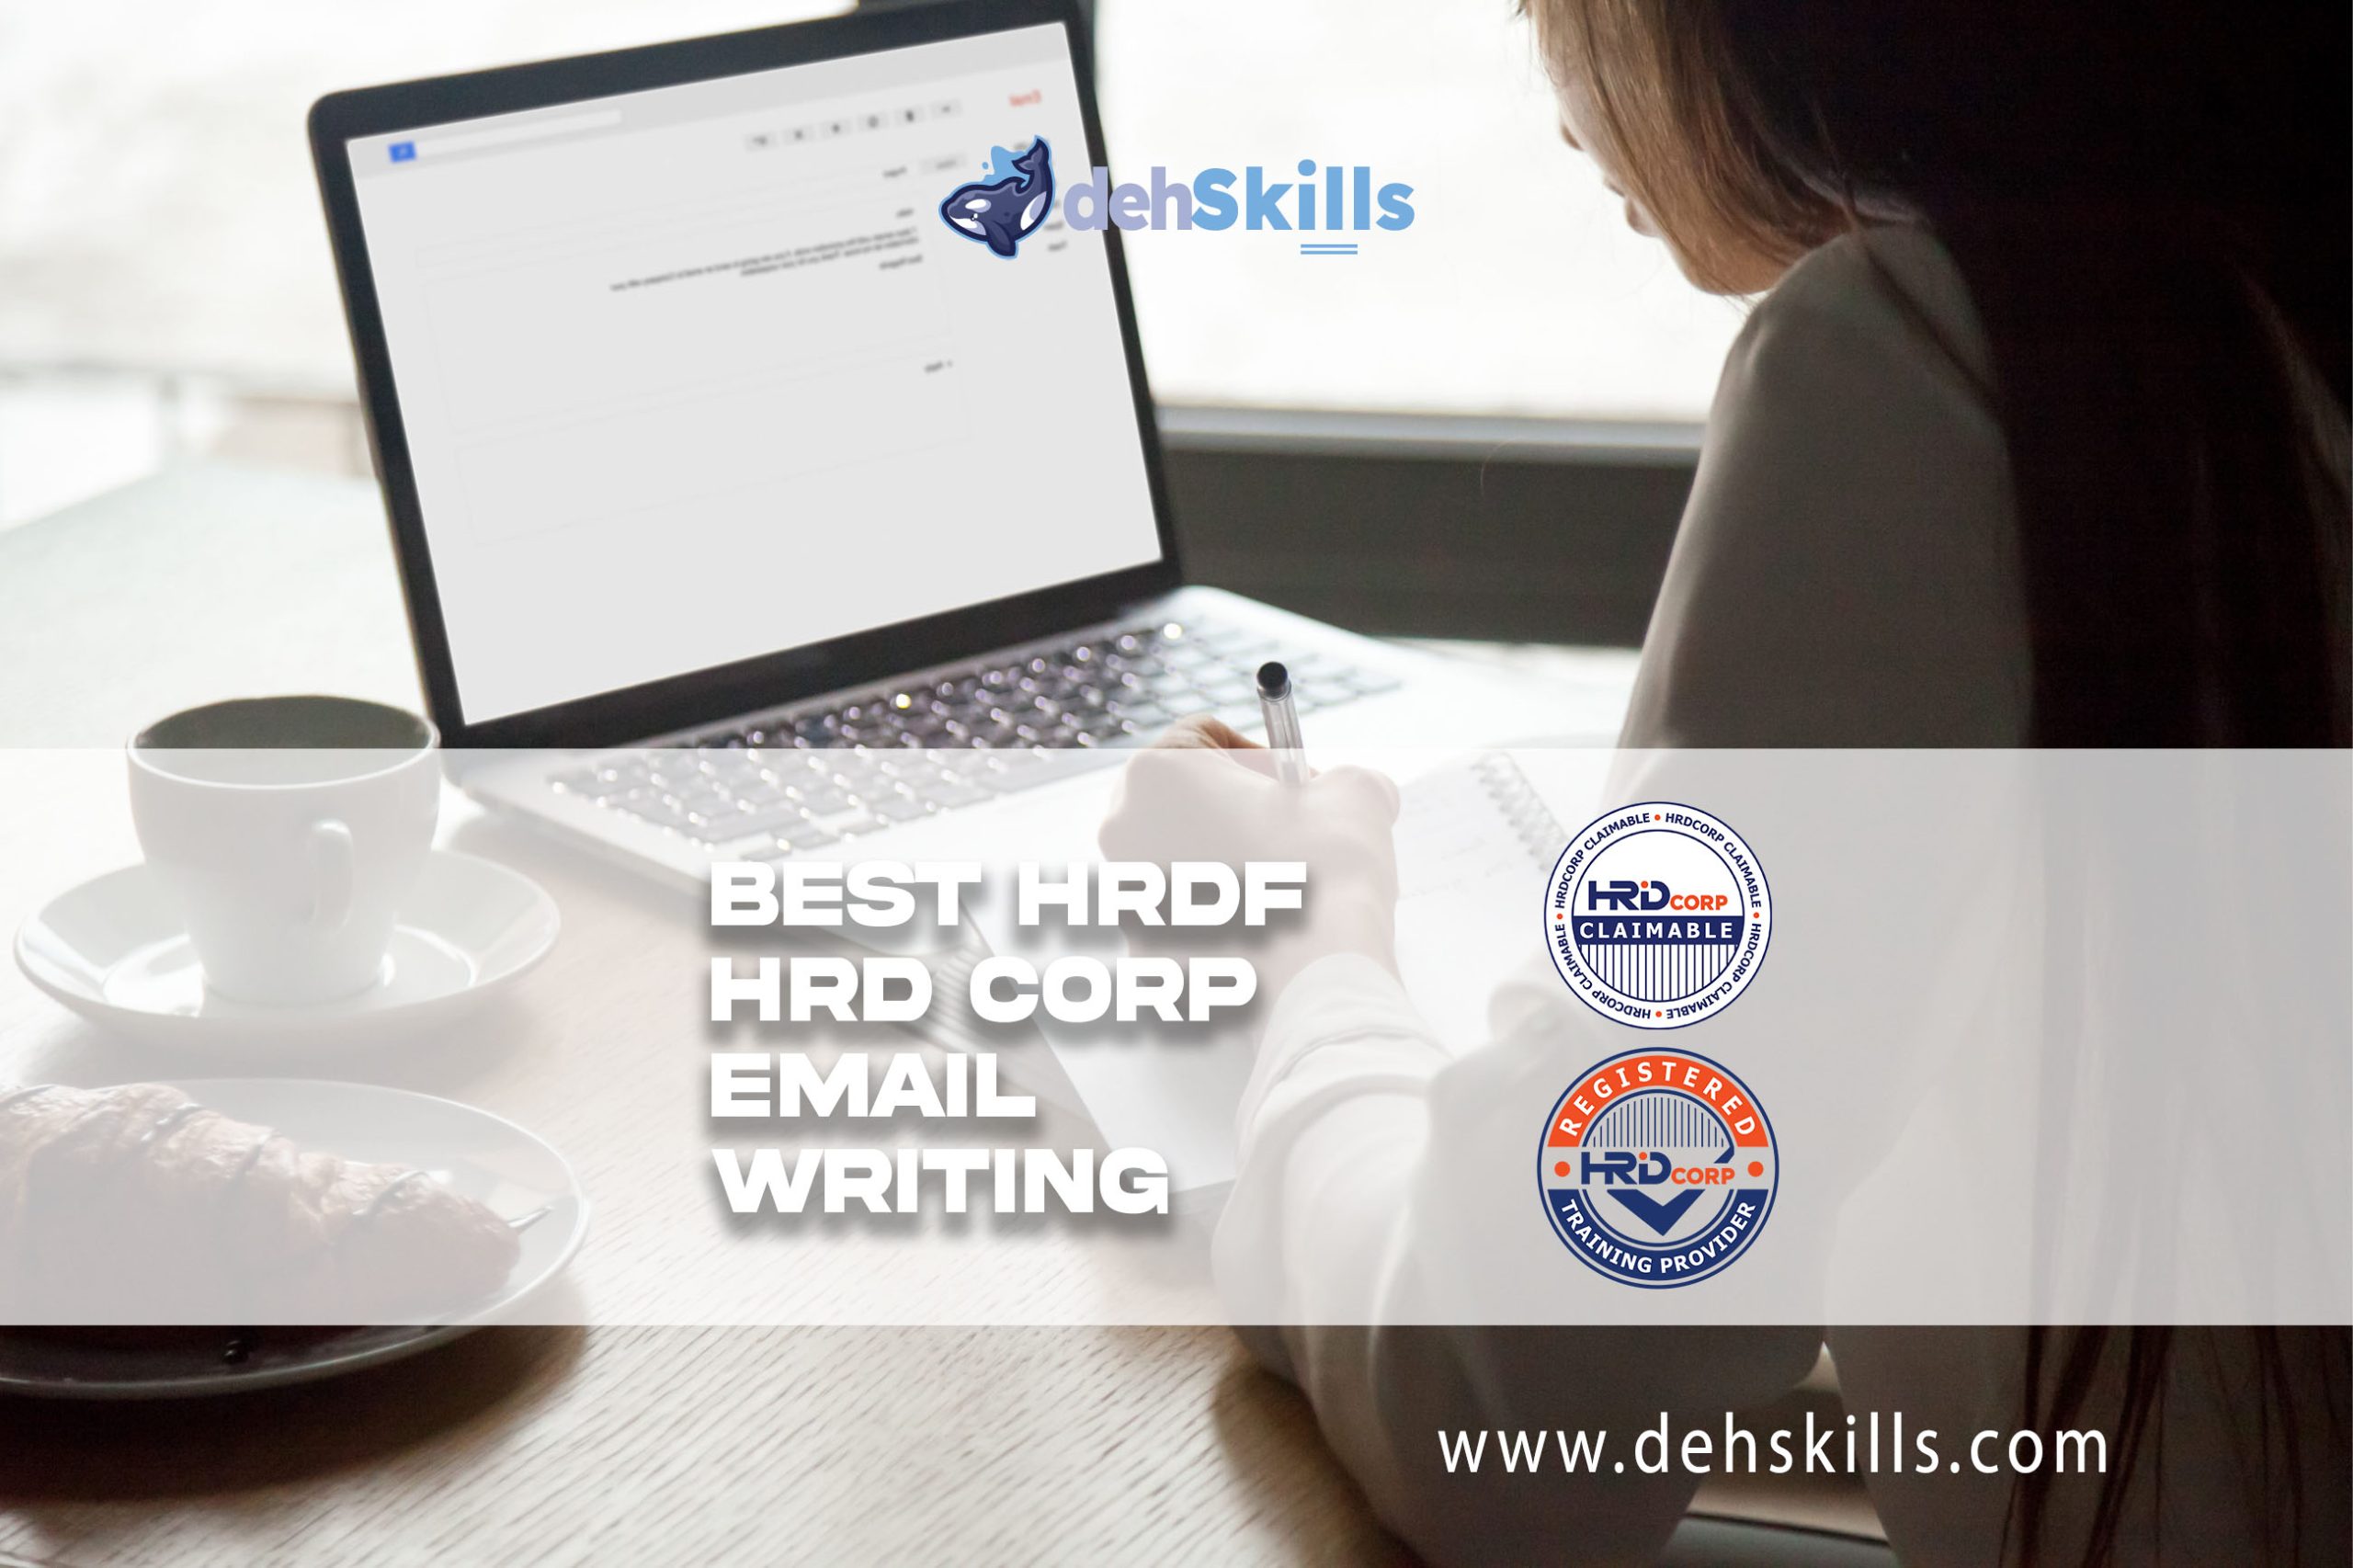 HRDF HRD Corp Claimable Email Writing Training